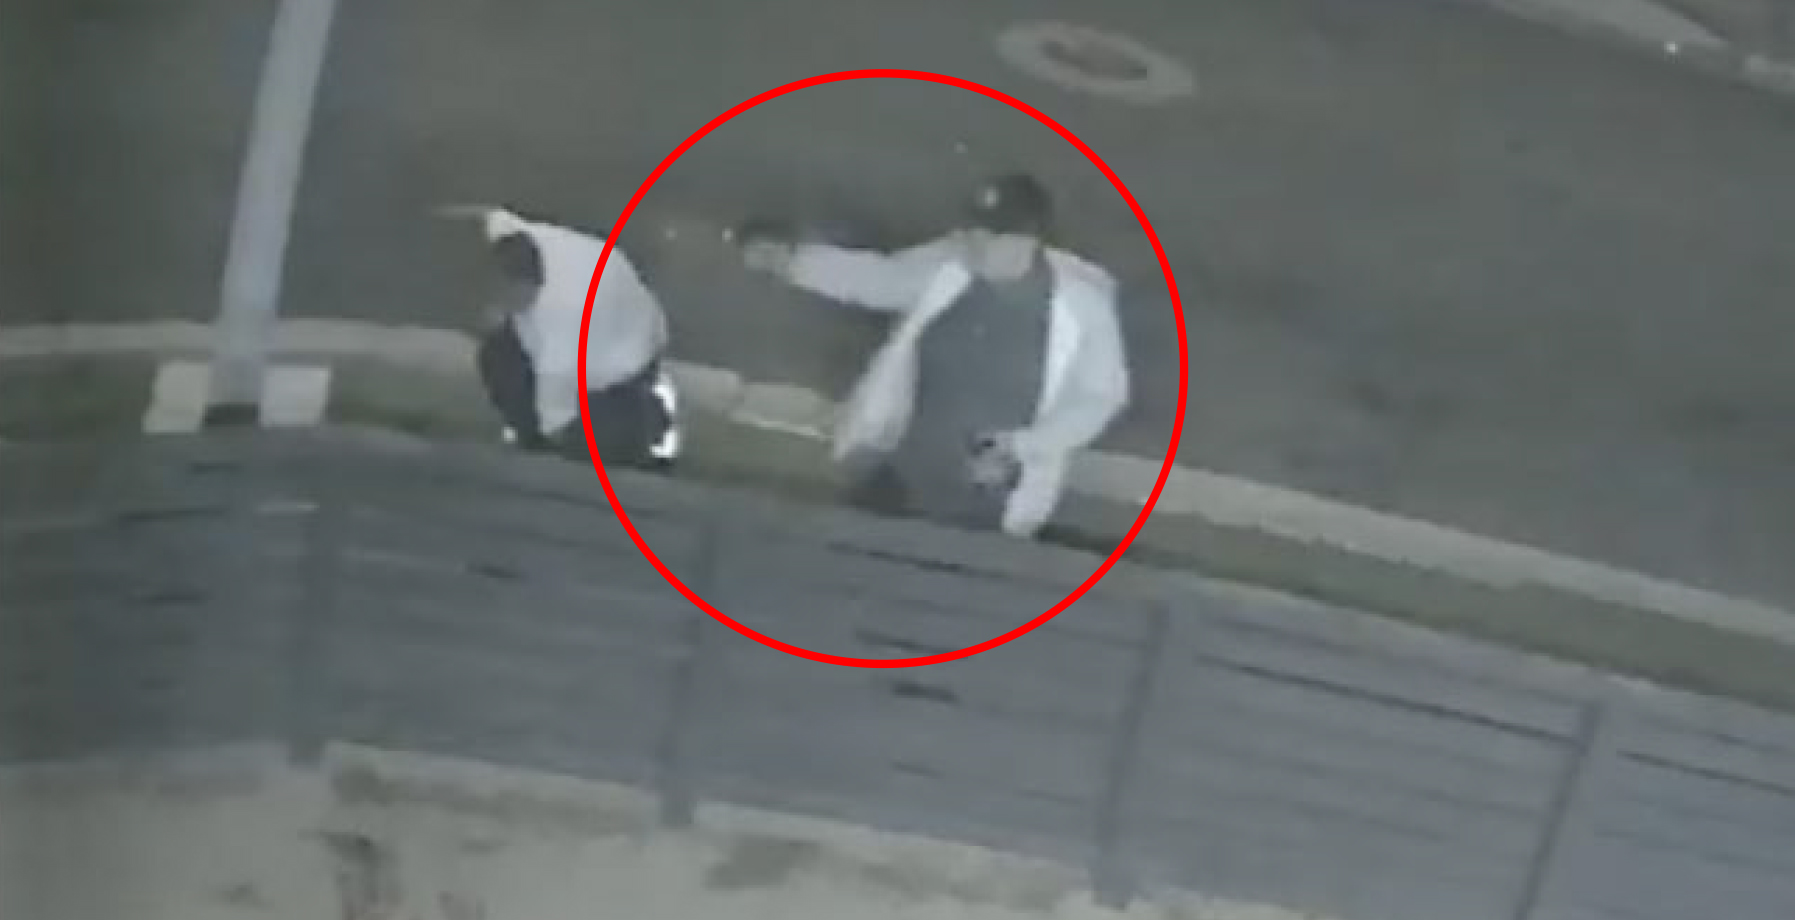 A screen shot of Defendant pointing his weapon during the firefight with L.C, while Yanez is kneeling down. During the firefight, L.C. shot G. Hernandez, who later died at the hospital. Defendant was arrested four days later, at LAX, with a one-way ticket to Mexico.